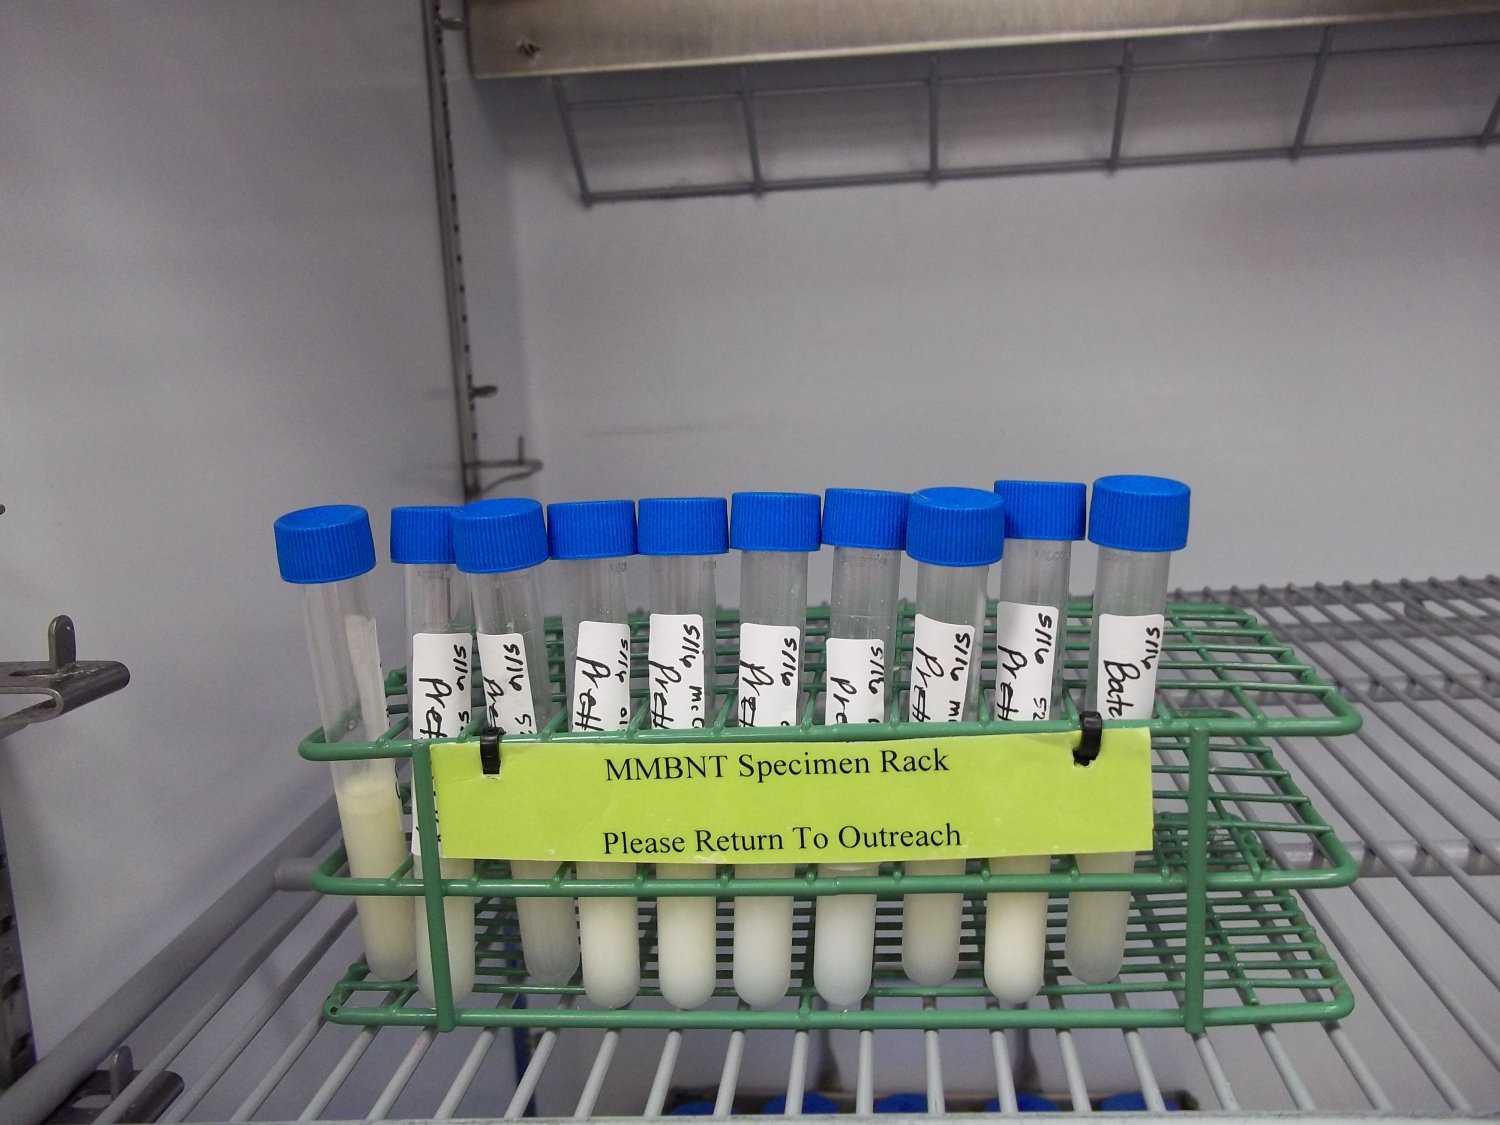 Samples of donor milk in a refrigerator